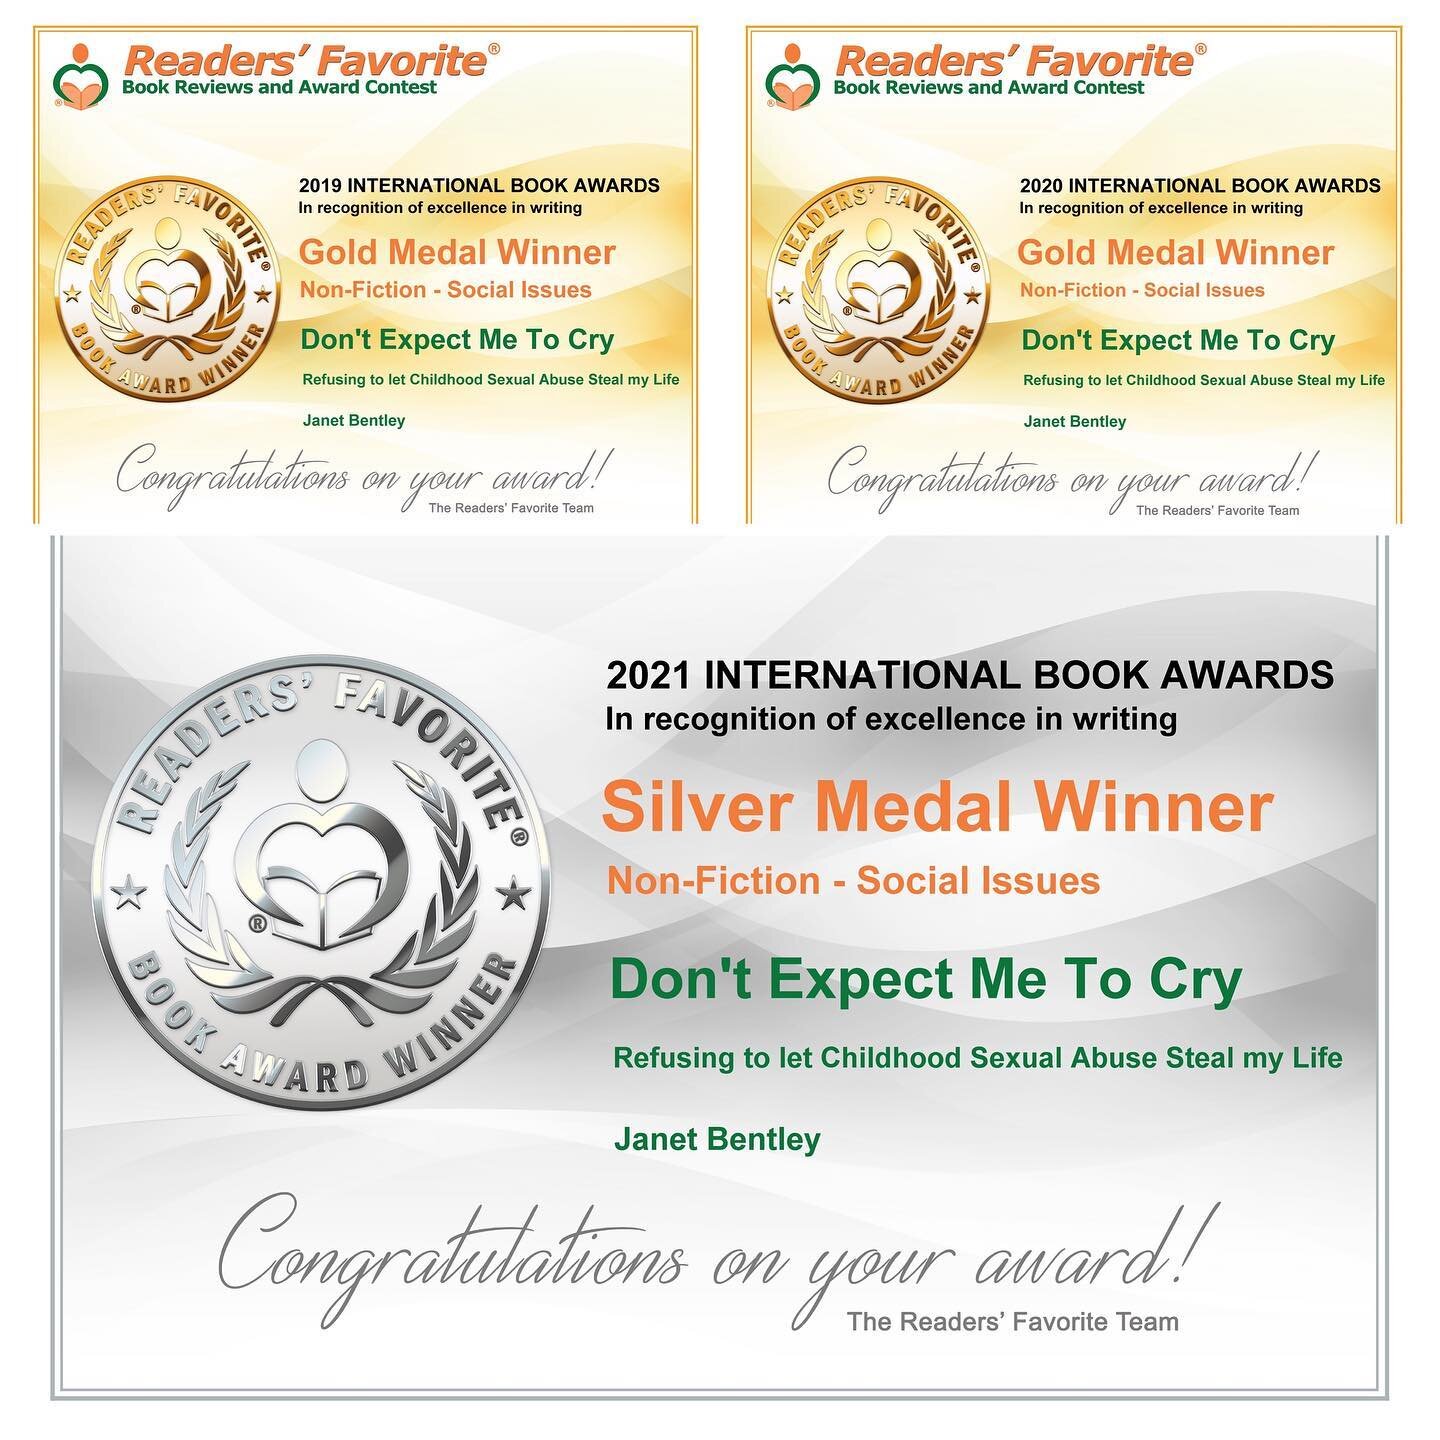 3 Years in a row.  I am so grateful and motivated to keep going. 
🙏🙂
&quot;Readers' Favorite recognizes &quot;Don't Expect Me To Cry&quot; by Janet Bentley in its annual international book award contest, currently available at http://www.amazon.com